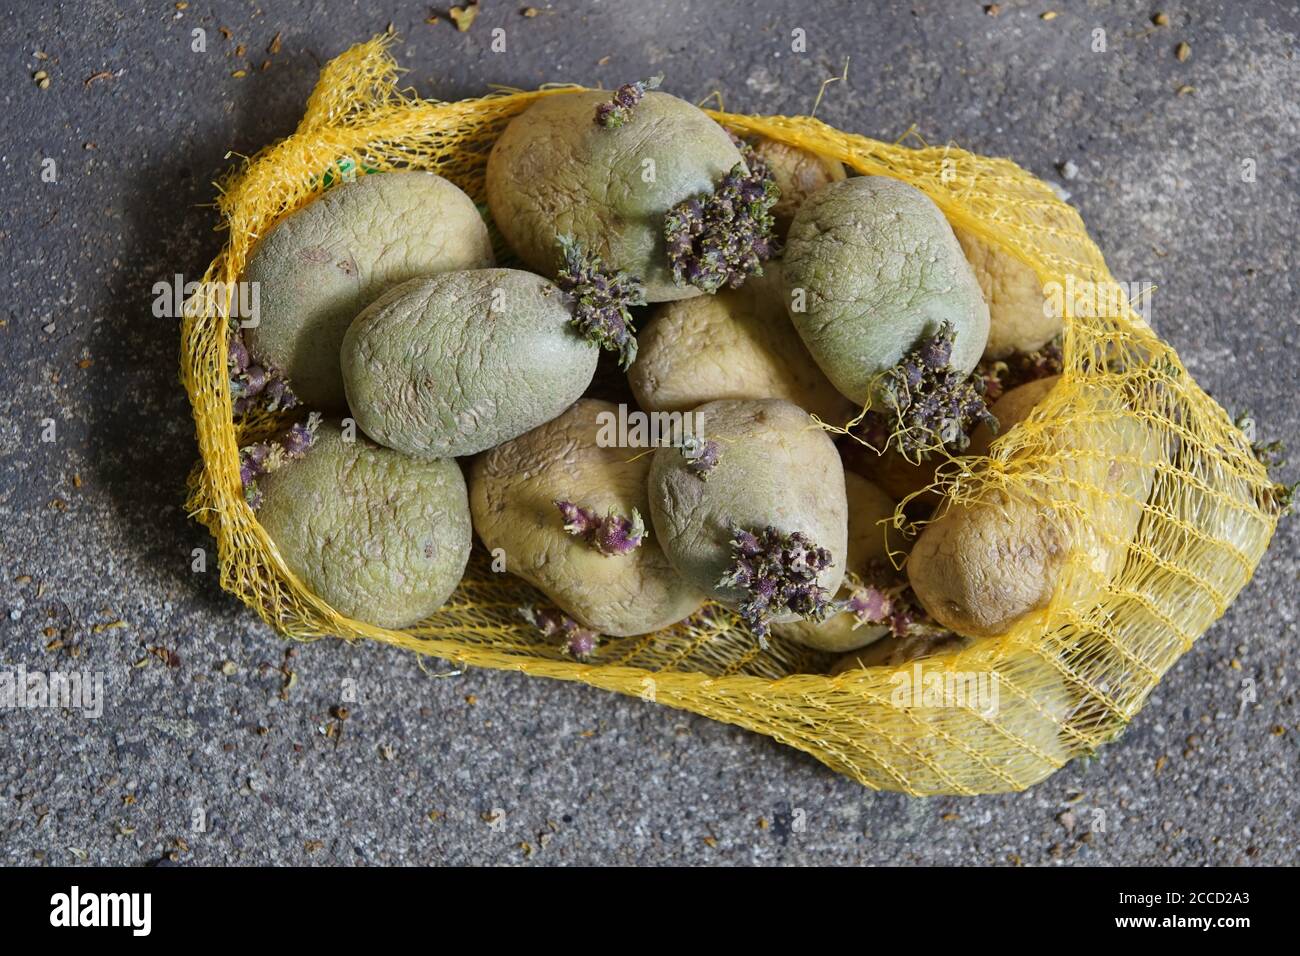 Closeup shot of rotten old potatoes in a sack on the floor Stock Photo